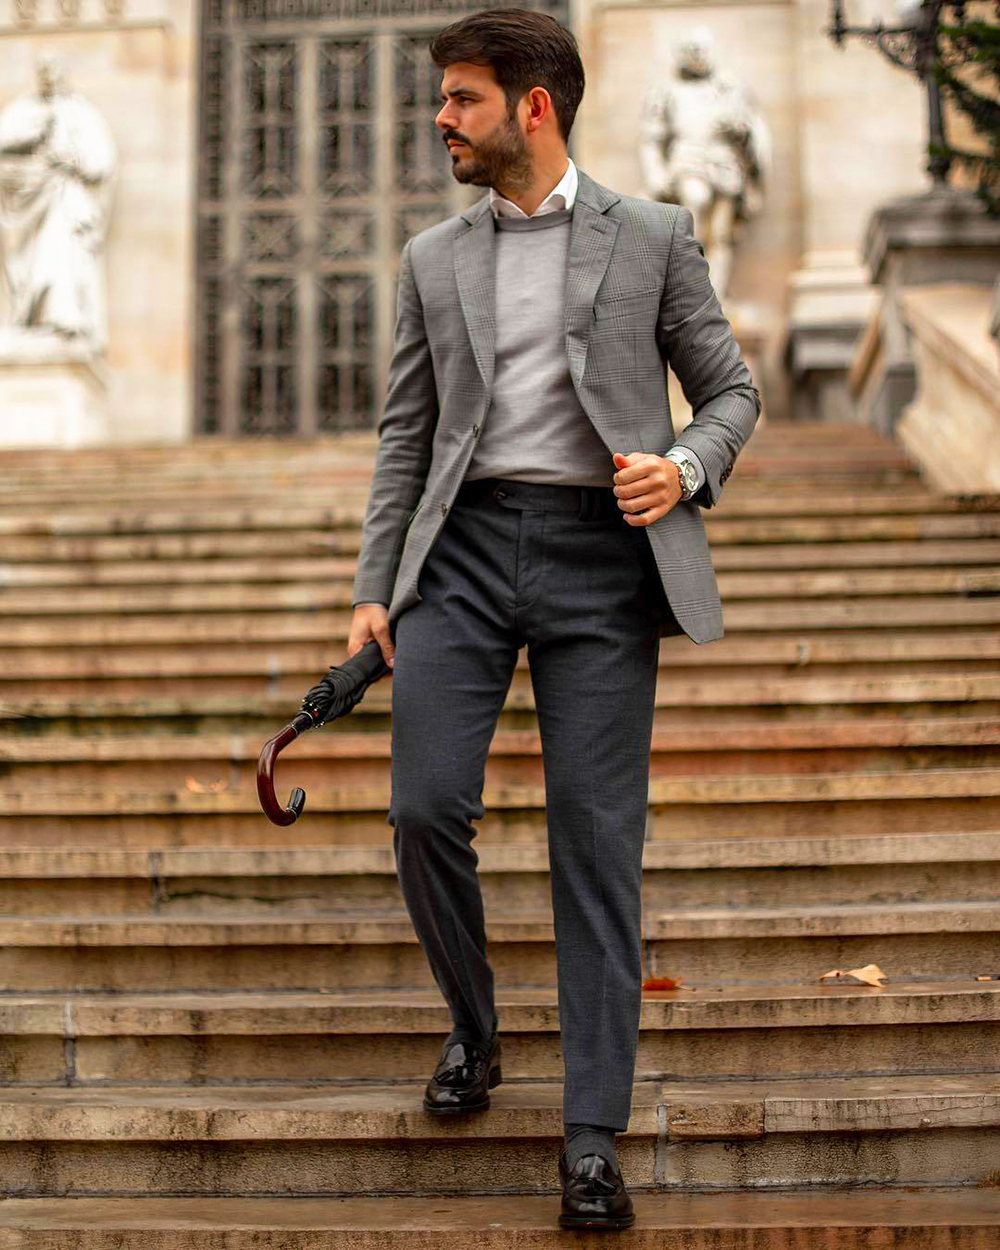 Blazer, crew neck sweater, shirt, and loafers semi-formal outfit